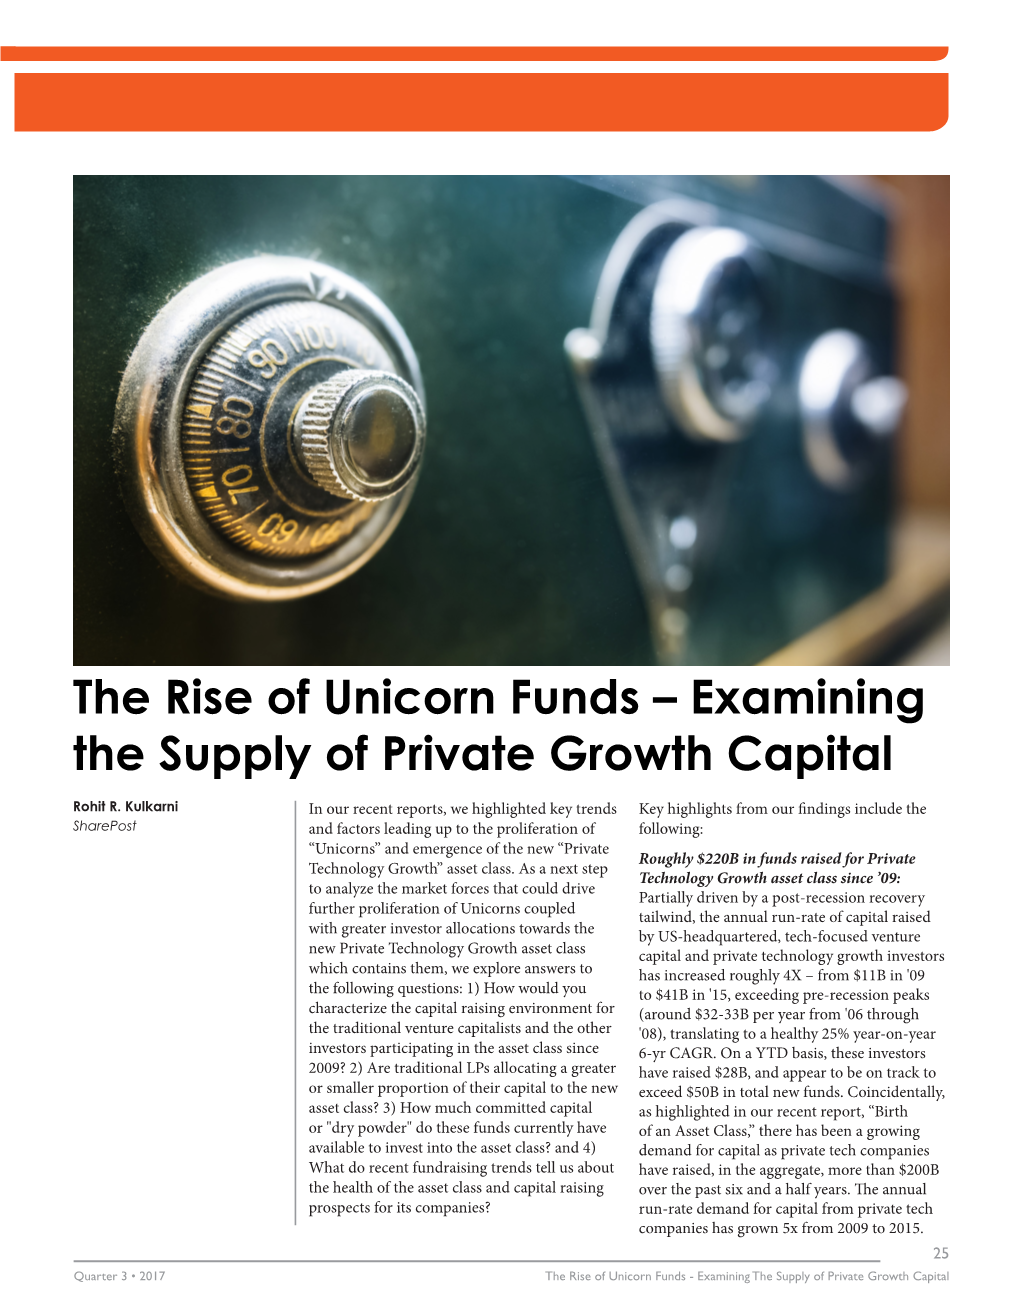 The Rise of Unicorn Funds – Examining the Supply of Private Growth Capital